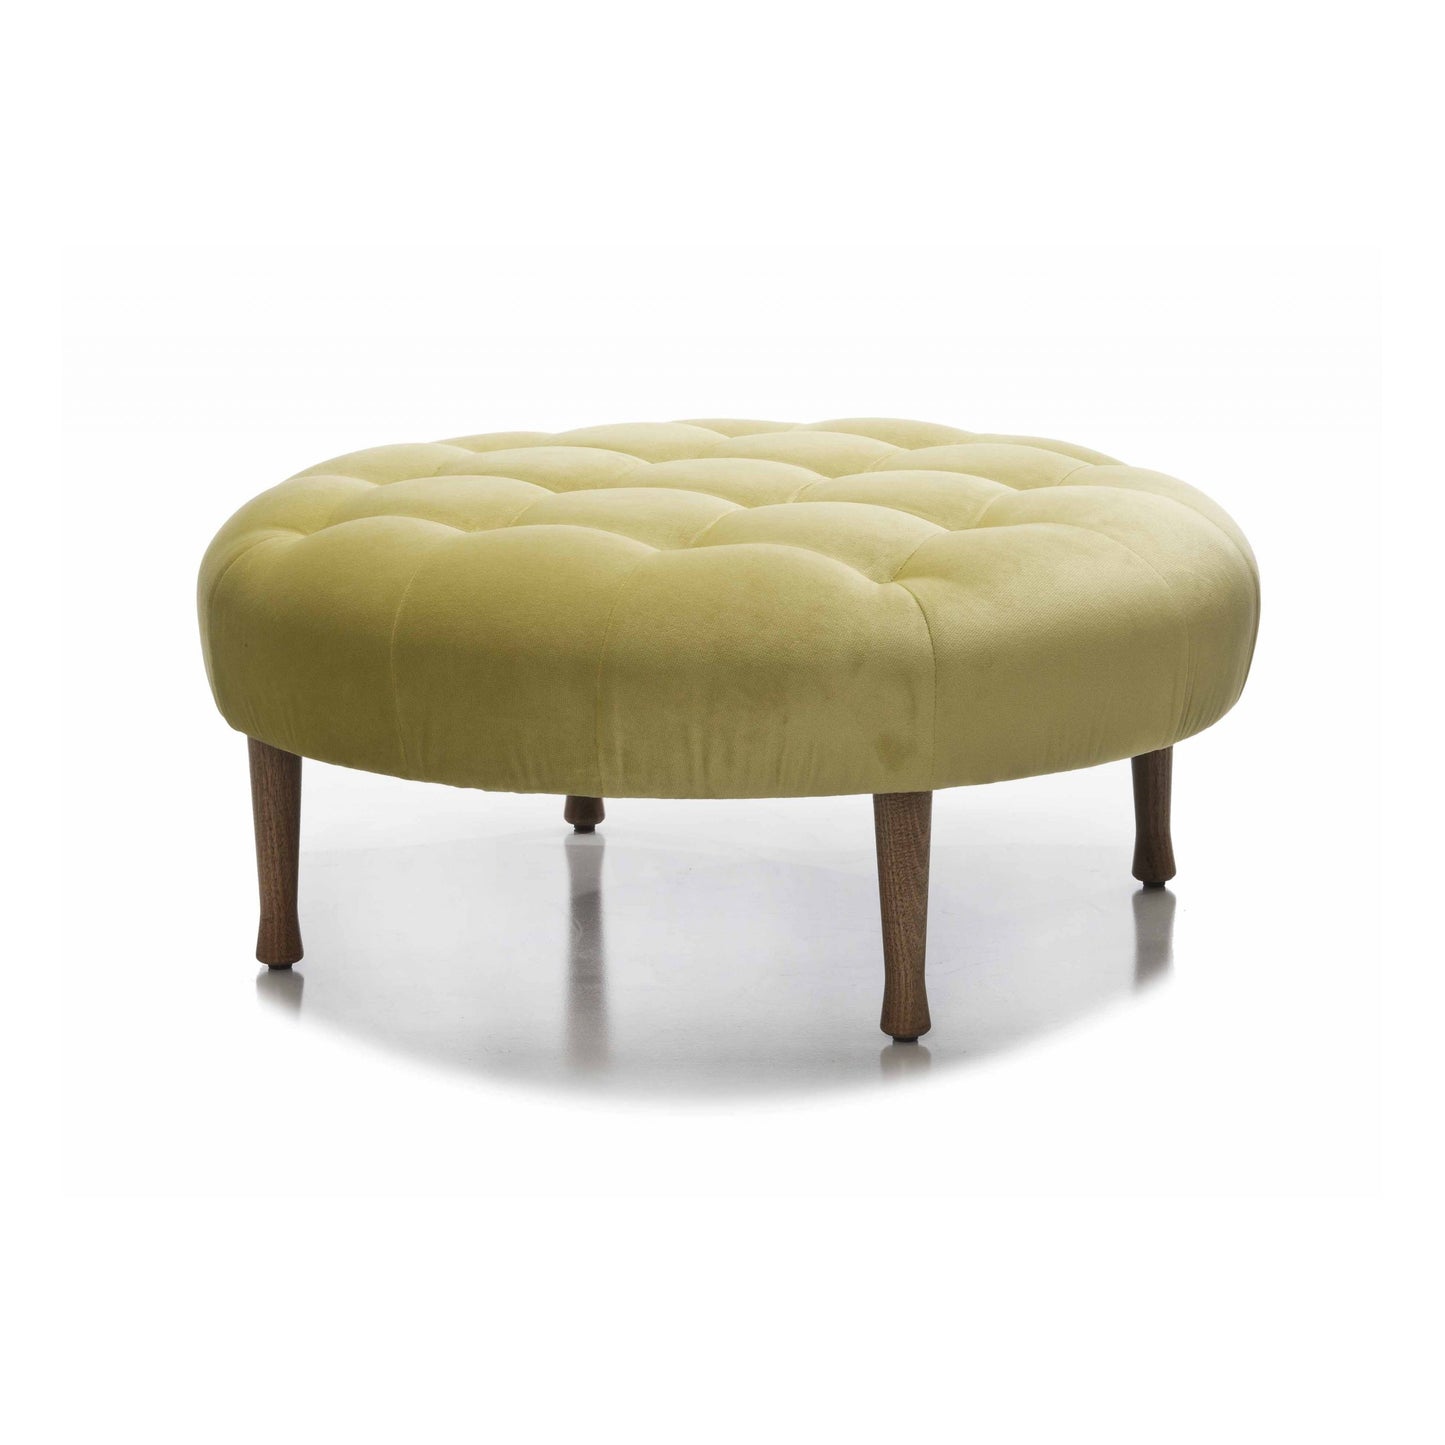 Dimple Ottoman by Molmic available from Make Your House A Home, Furniture Store located in Bendigo, Victoria. Australian Made in Melbourne.